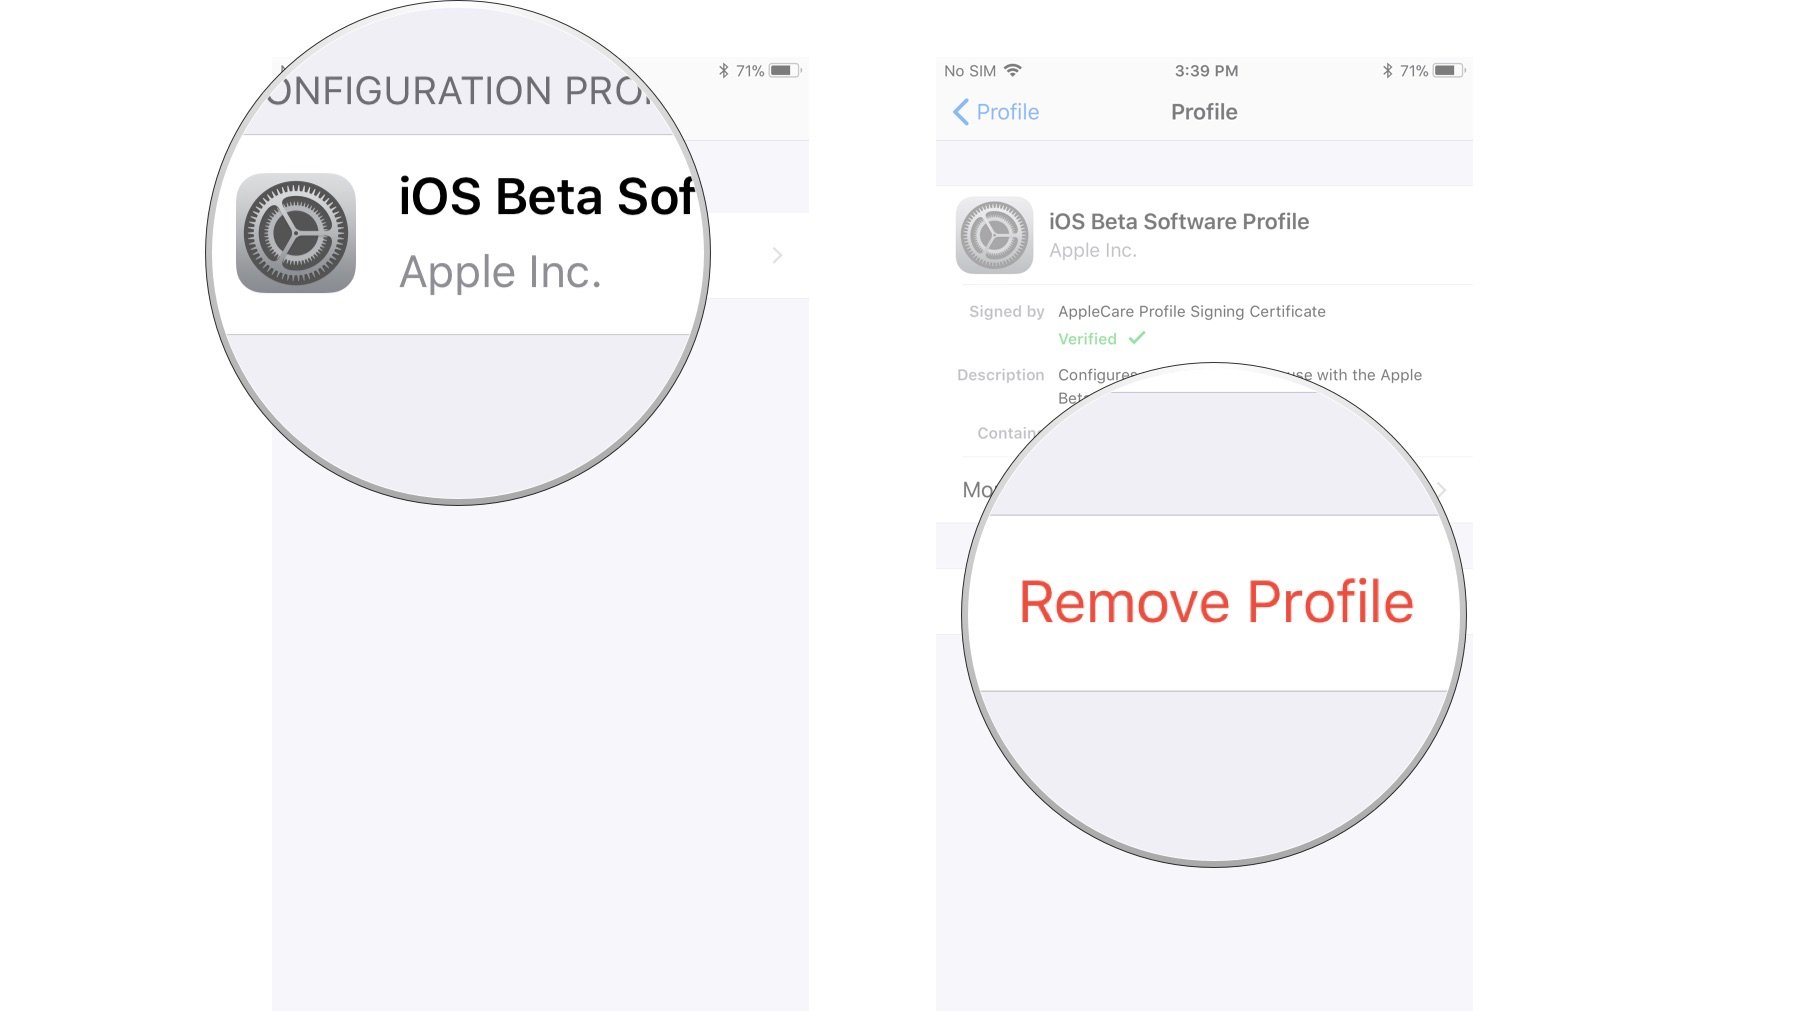 Update from beta to official release, showing how to Tap iOS Beta Software Profile, then tap Remove Profile